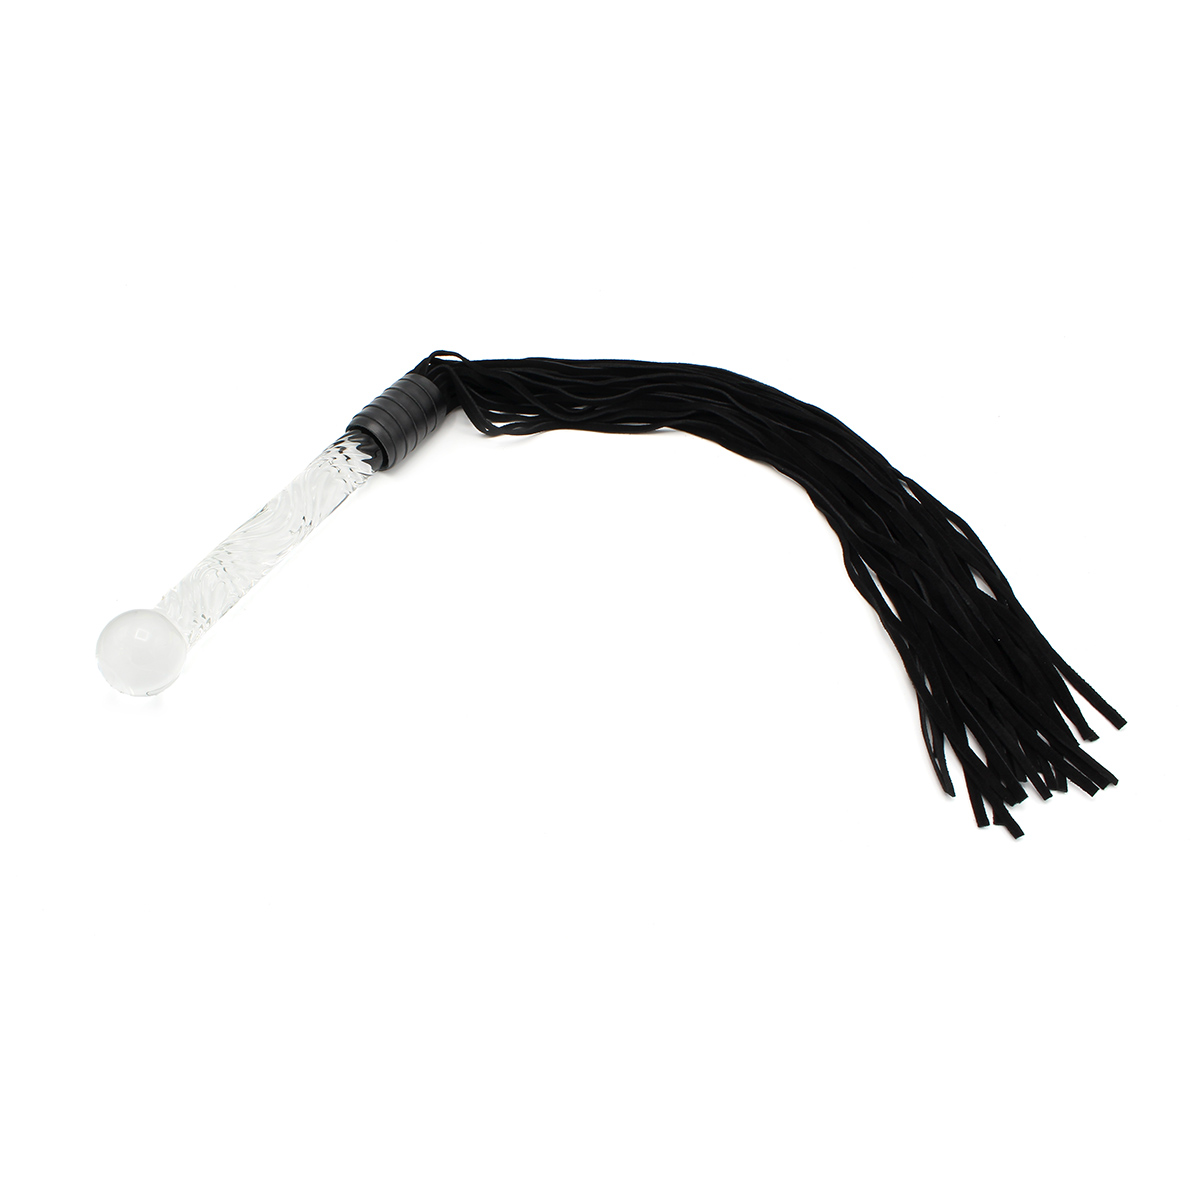 Fancy-Black-Flogger-with-Glass-Handle-OPR-321103-6